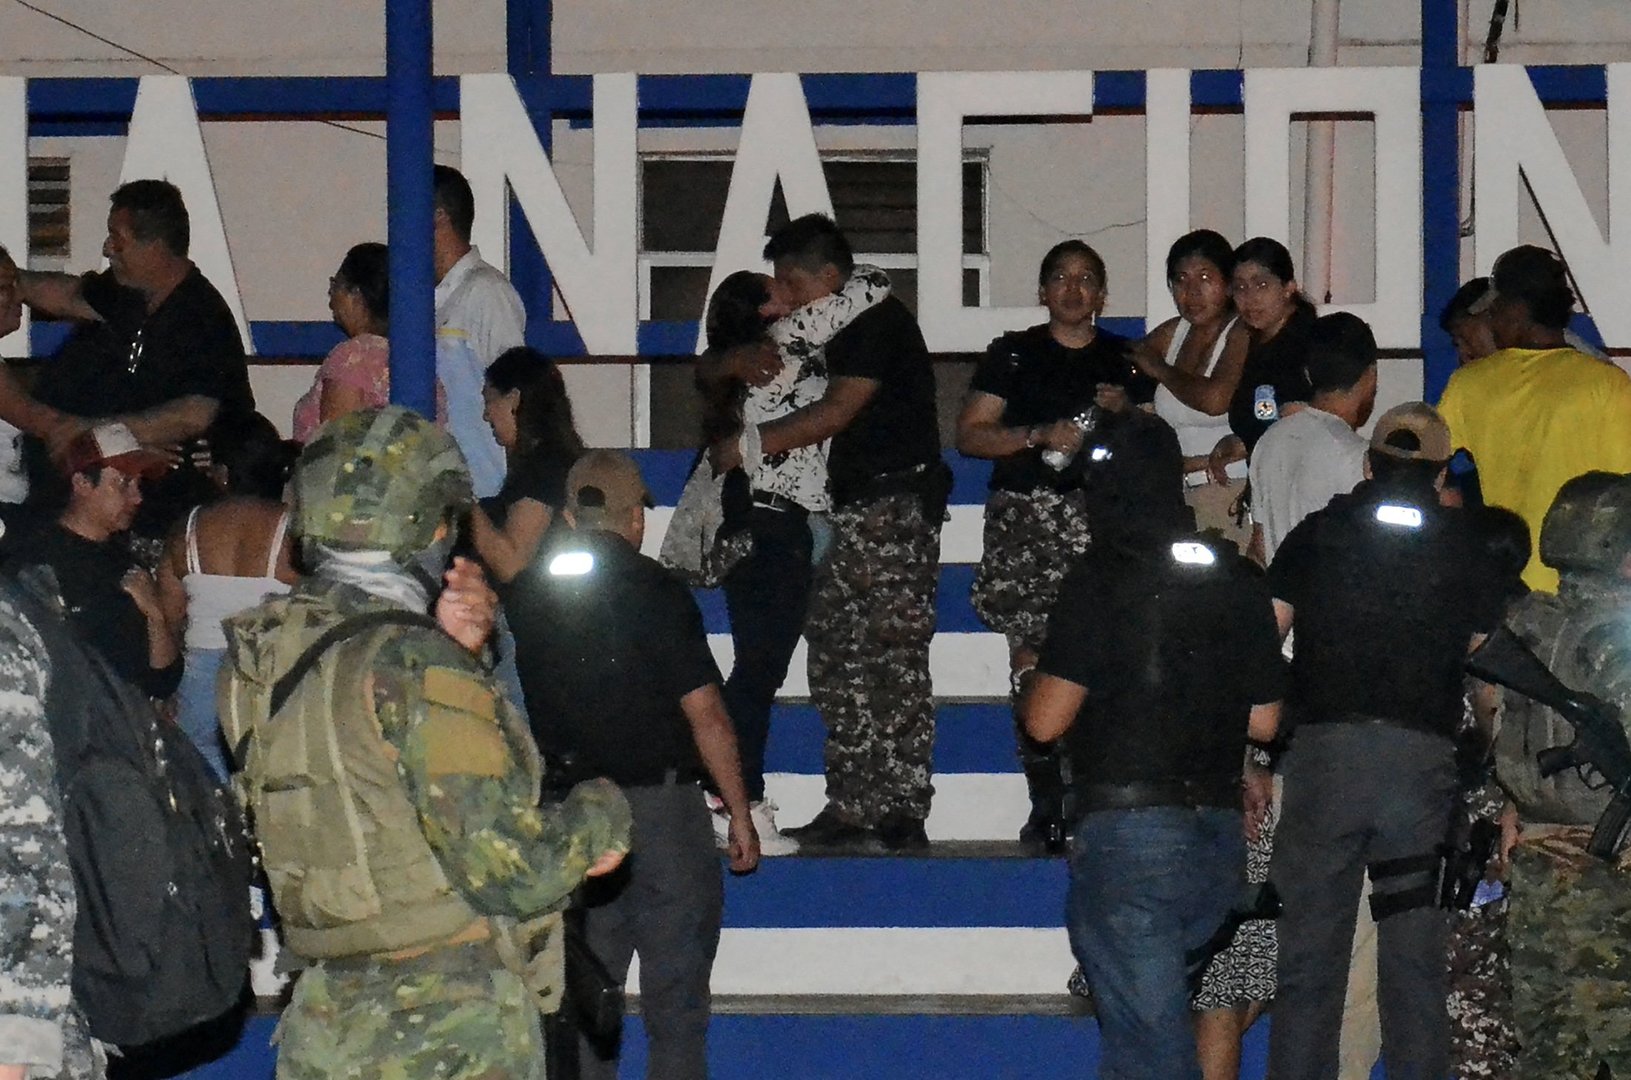 All prison staff held hostage by inmates in Ecuador now free, officials say